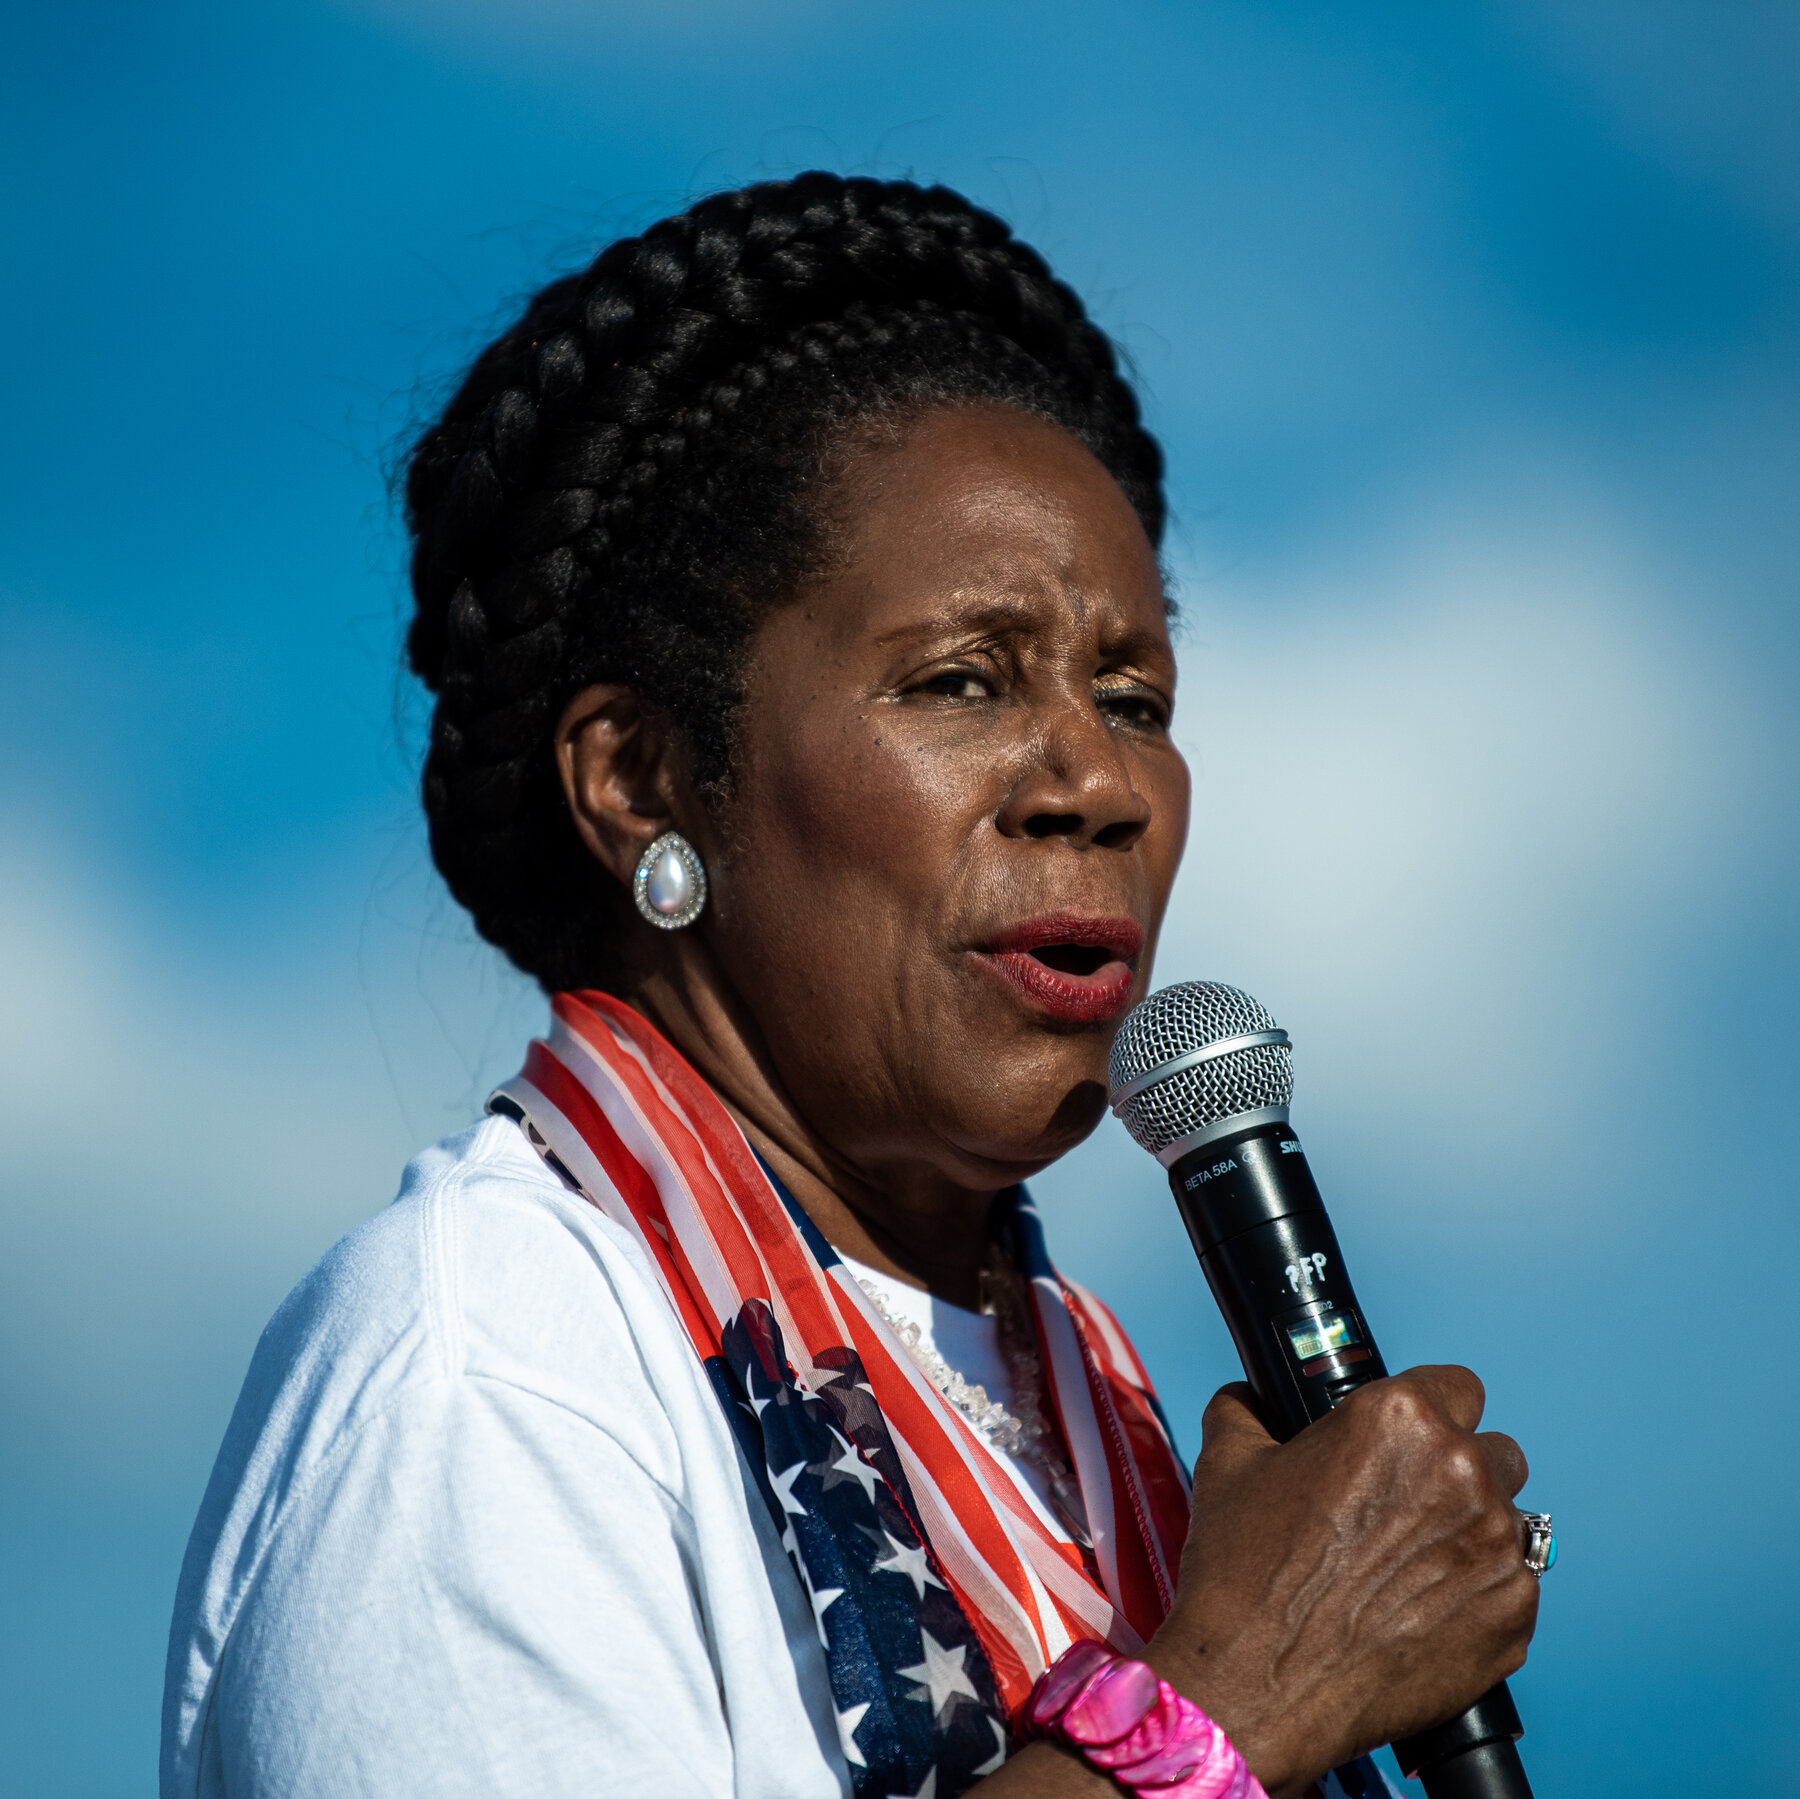  Rep. Sheila Jackson Lee, Champion for Progressive Causes, Dies at 74 